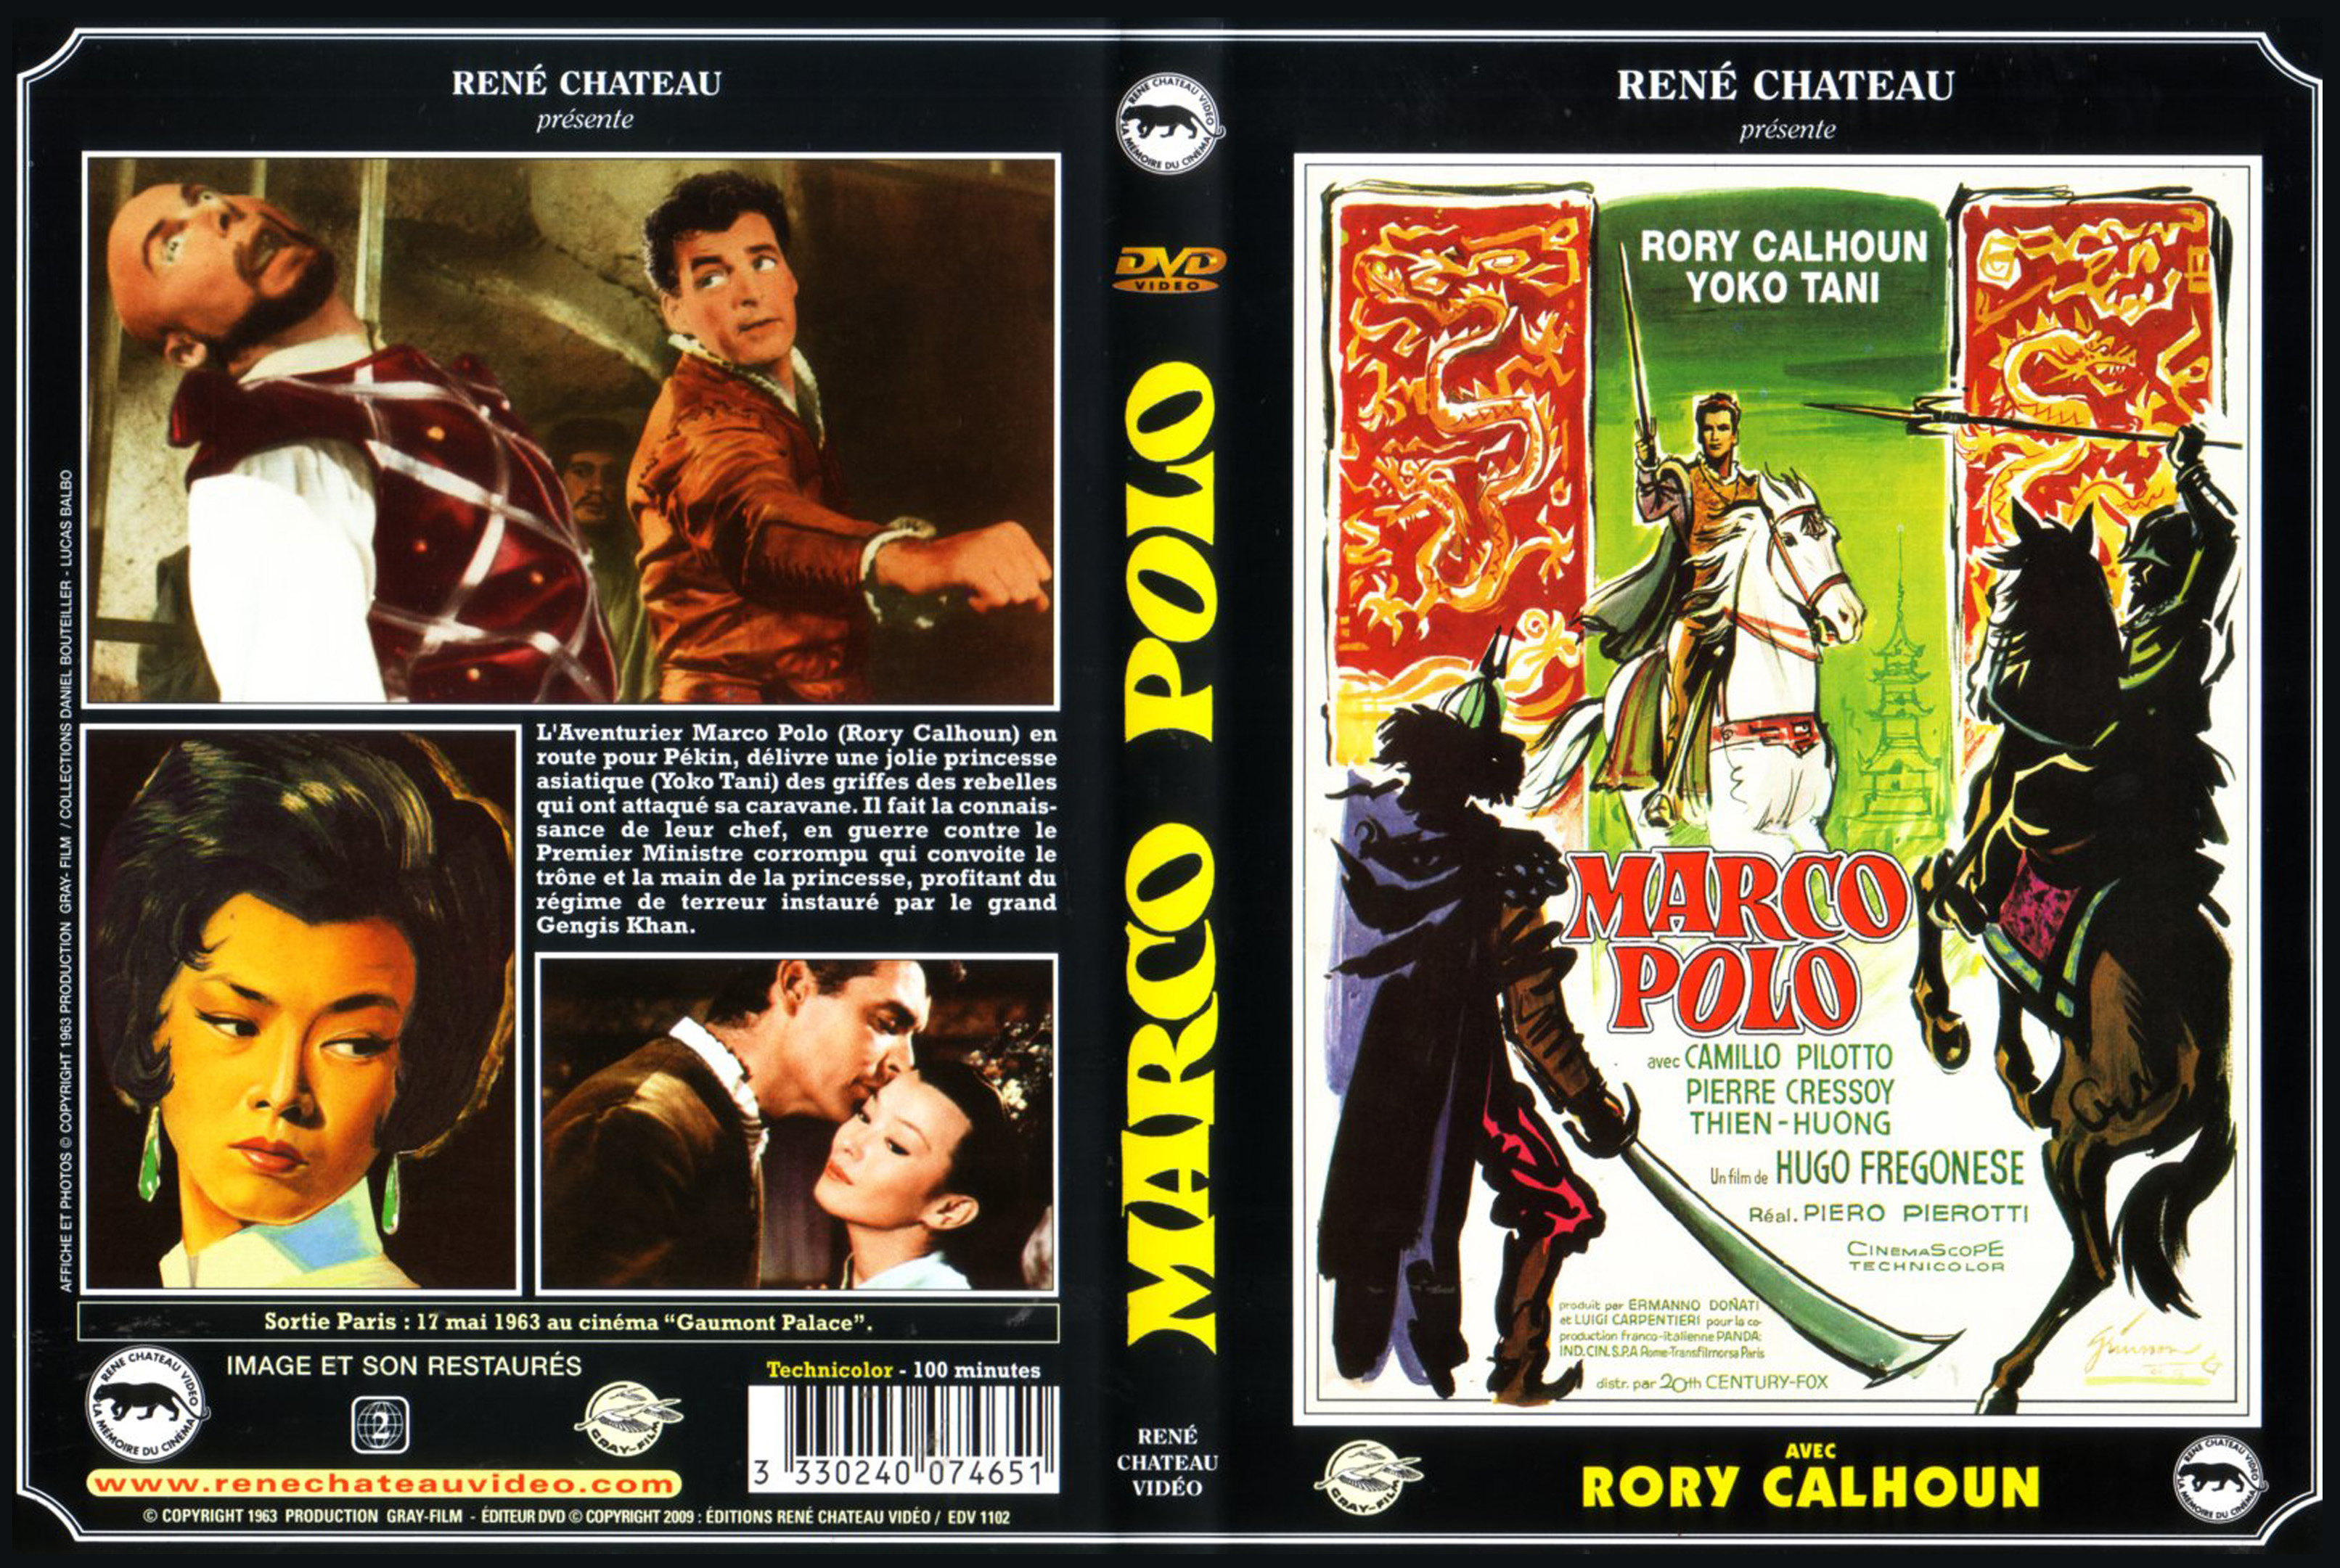 Jaquette DVD Marco Polo